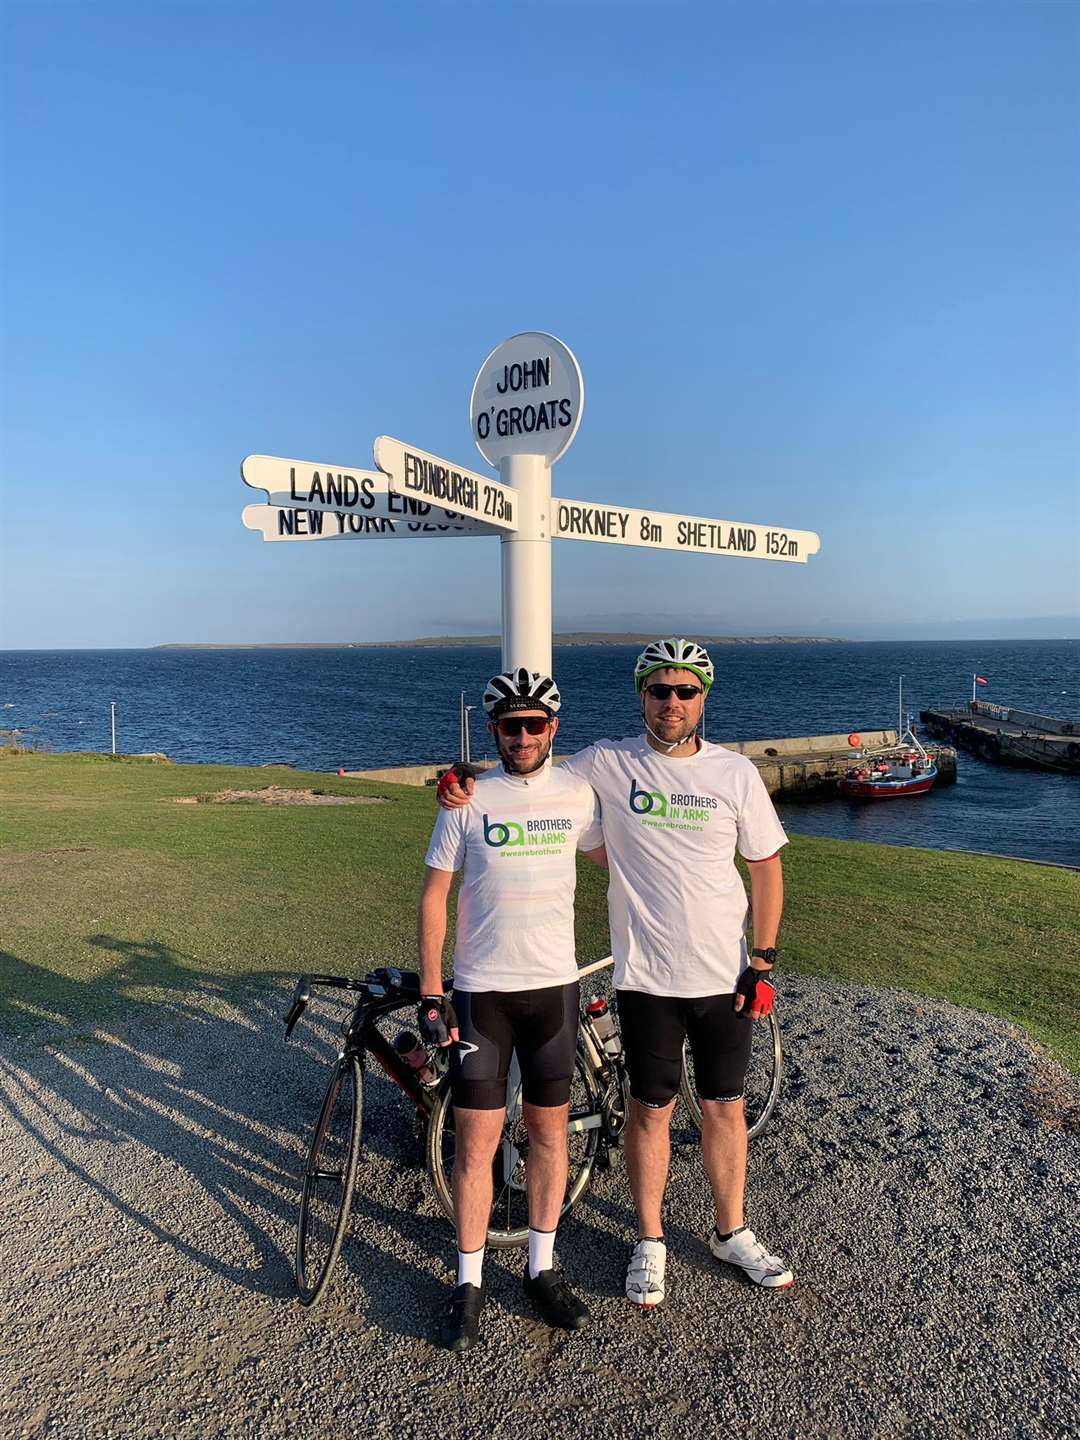 Charity cyclists Ian Johnston and Jamie Ritchie at John o' Groats on Wednesday morning.